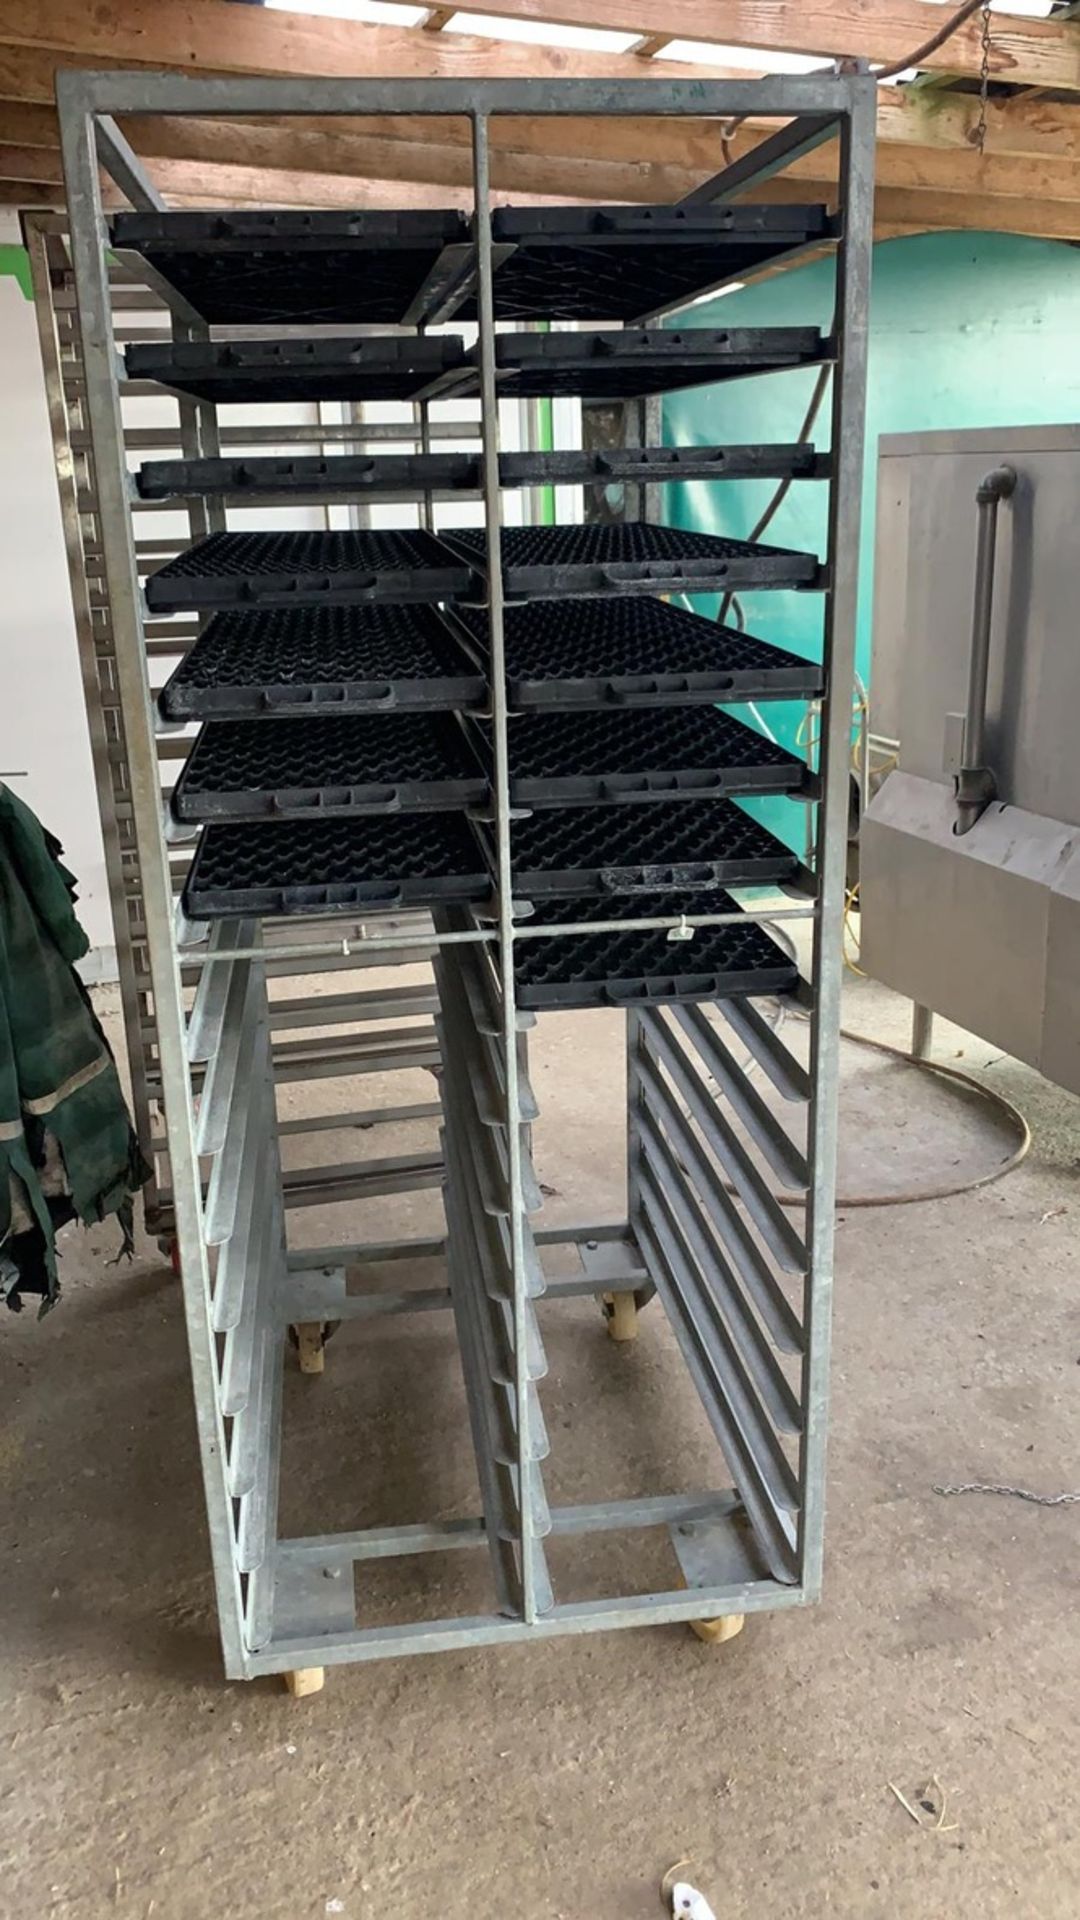 36 Insert tray holder complete with 15 trays only